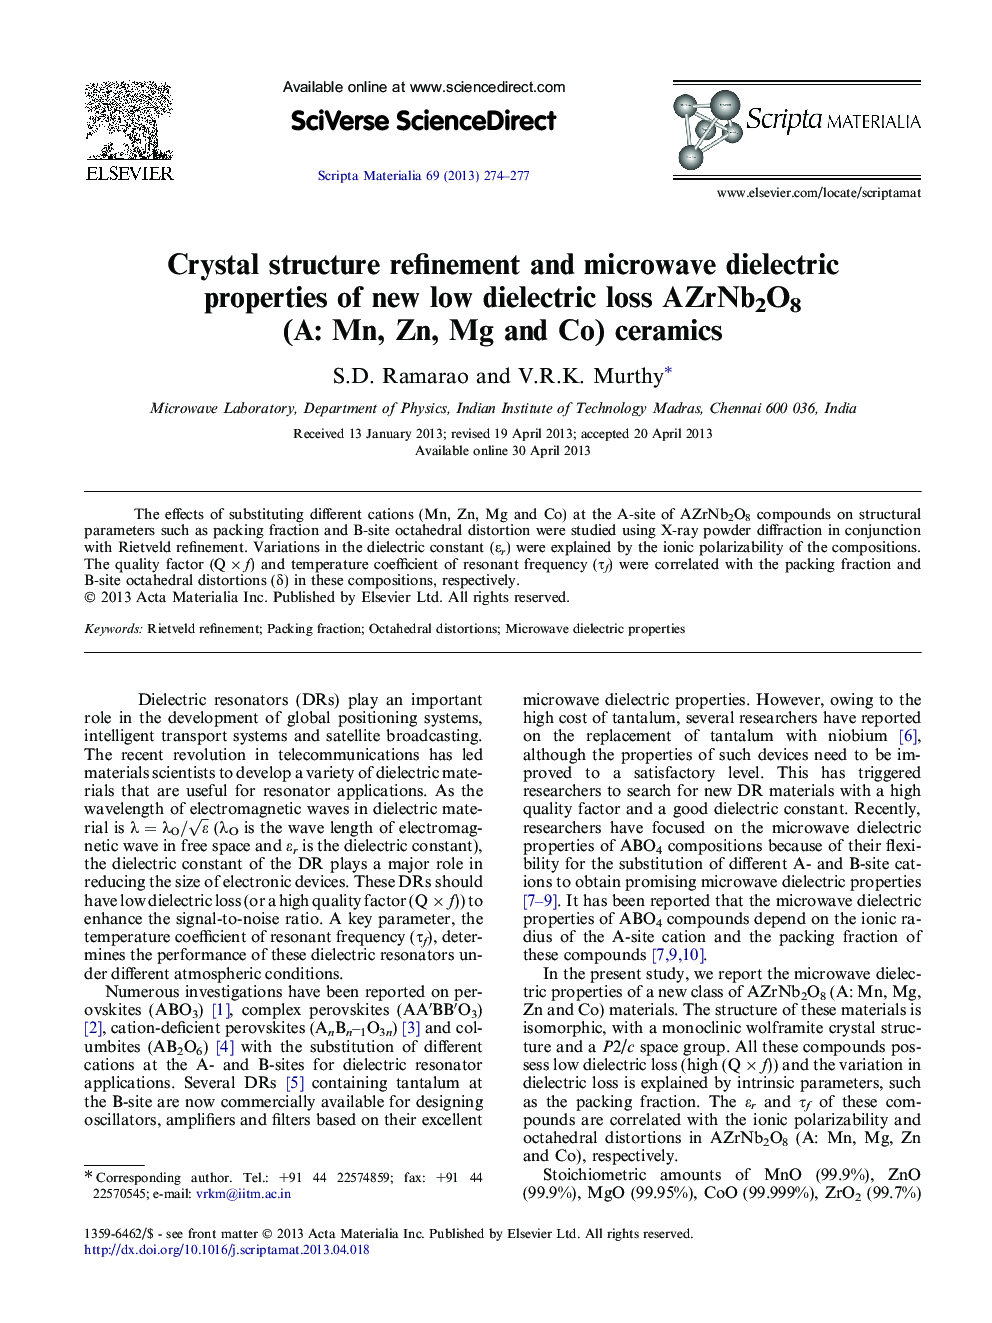 Crystal structure refinement and microwave dielectric properties of new low dielectric loss AZrNb2O8 (A: Mn, Zn, Mg and Co) ceramics